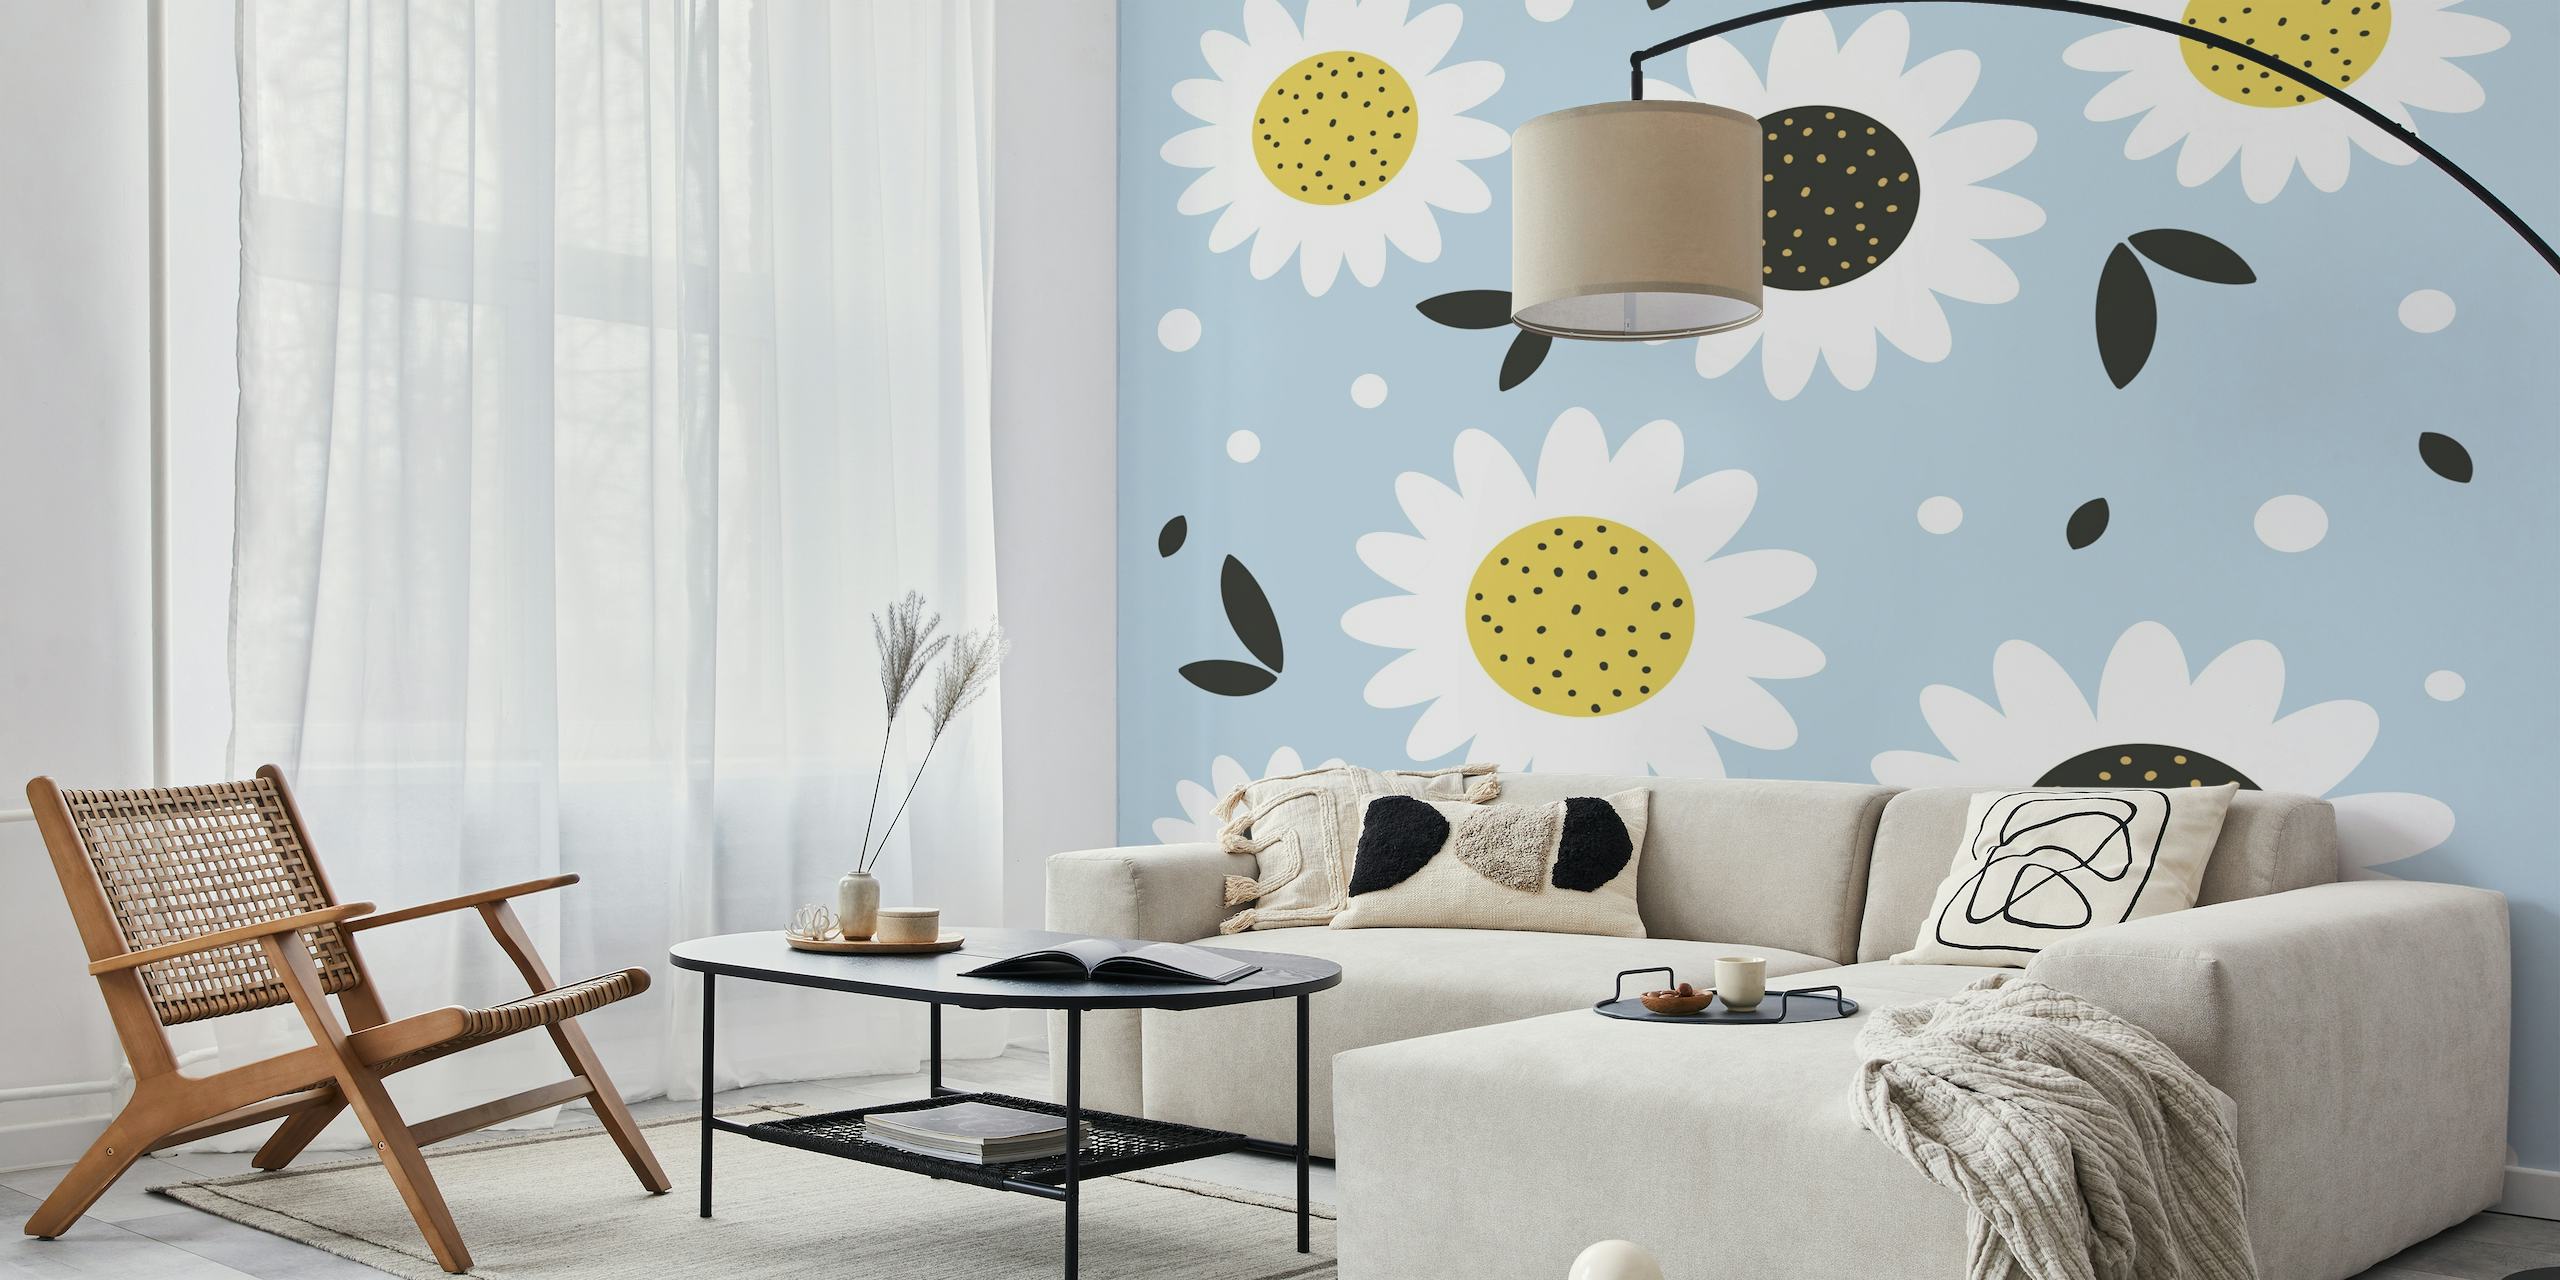 Daisy pattern wall mural with sky-blue background and floating seed accents